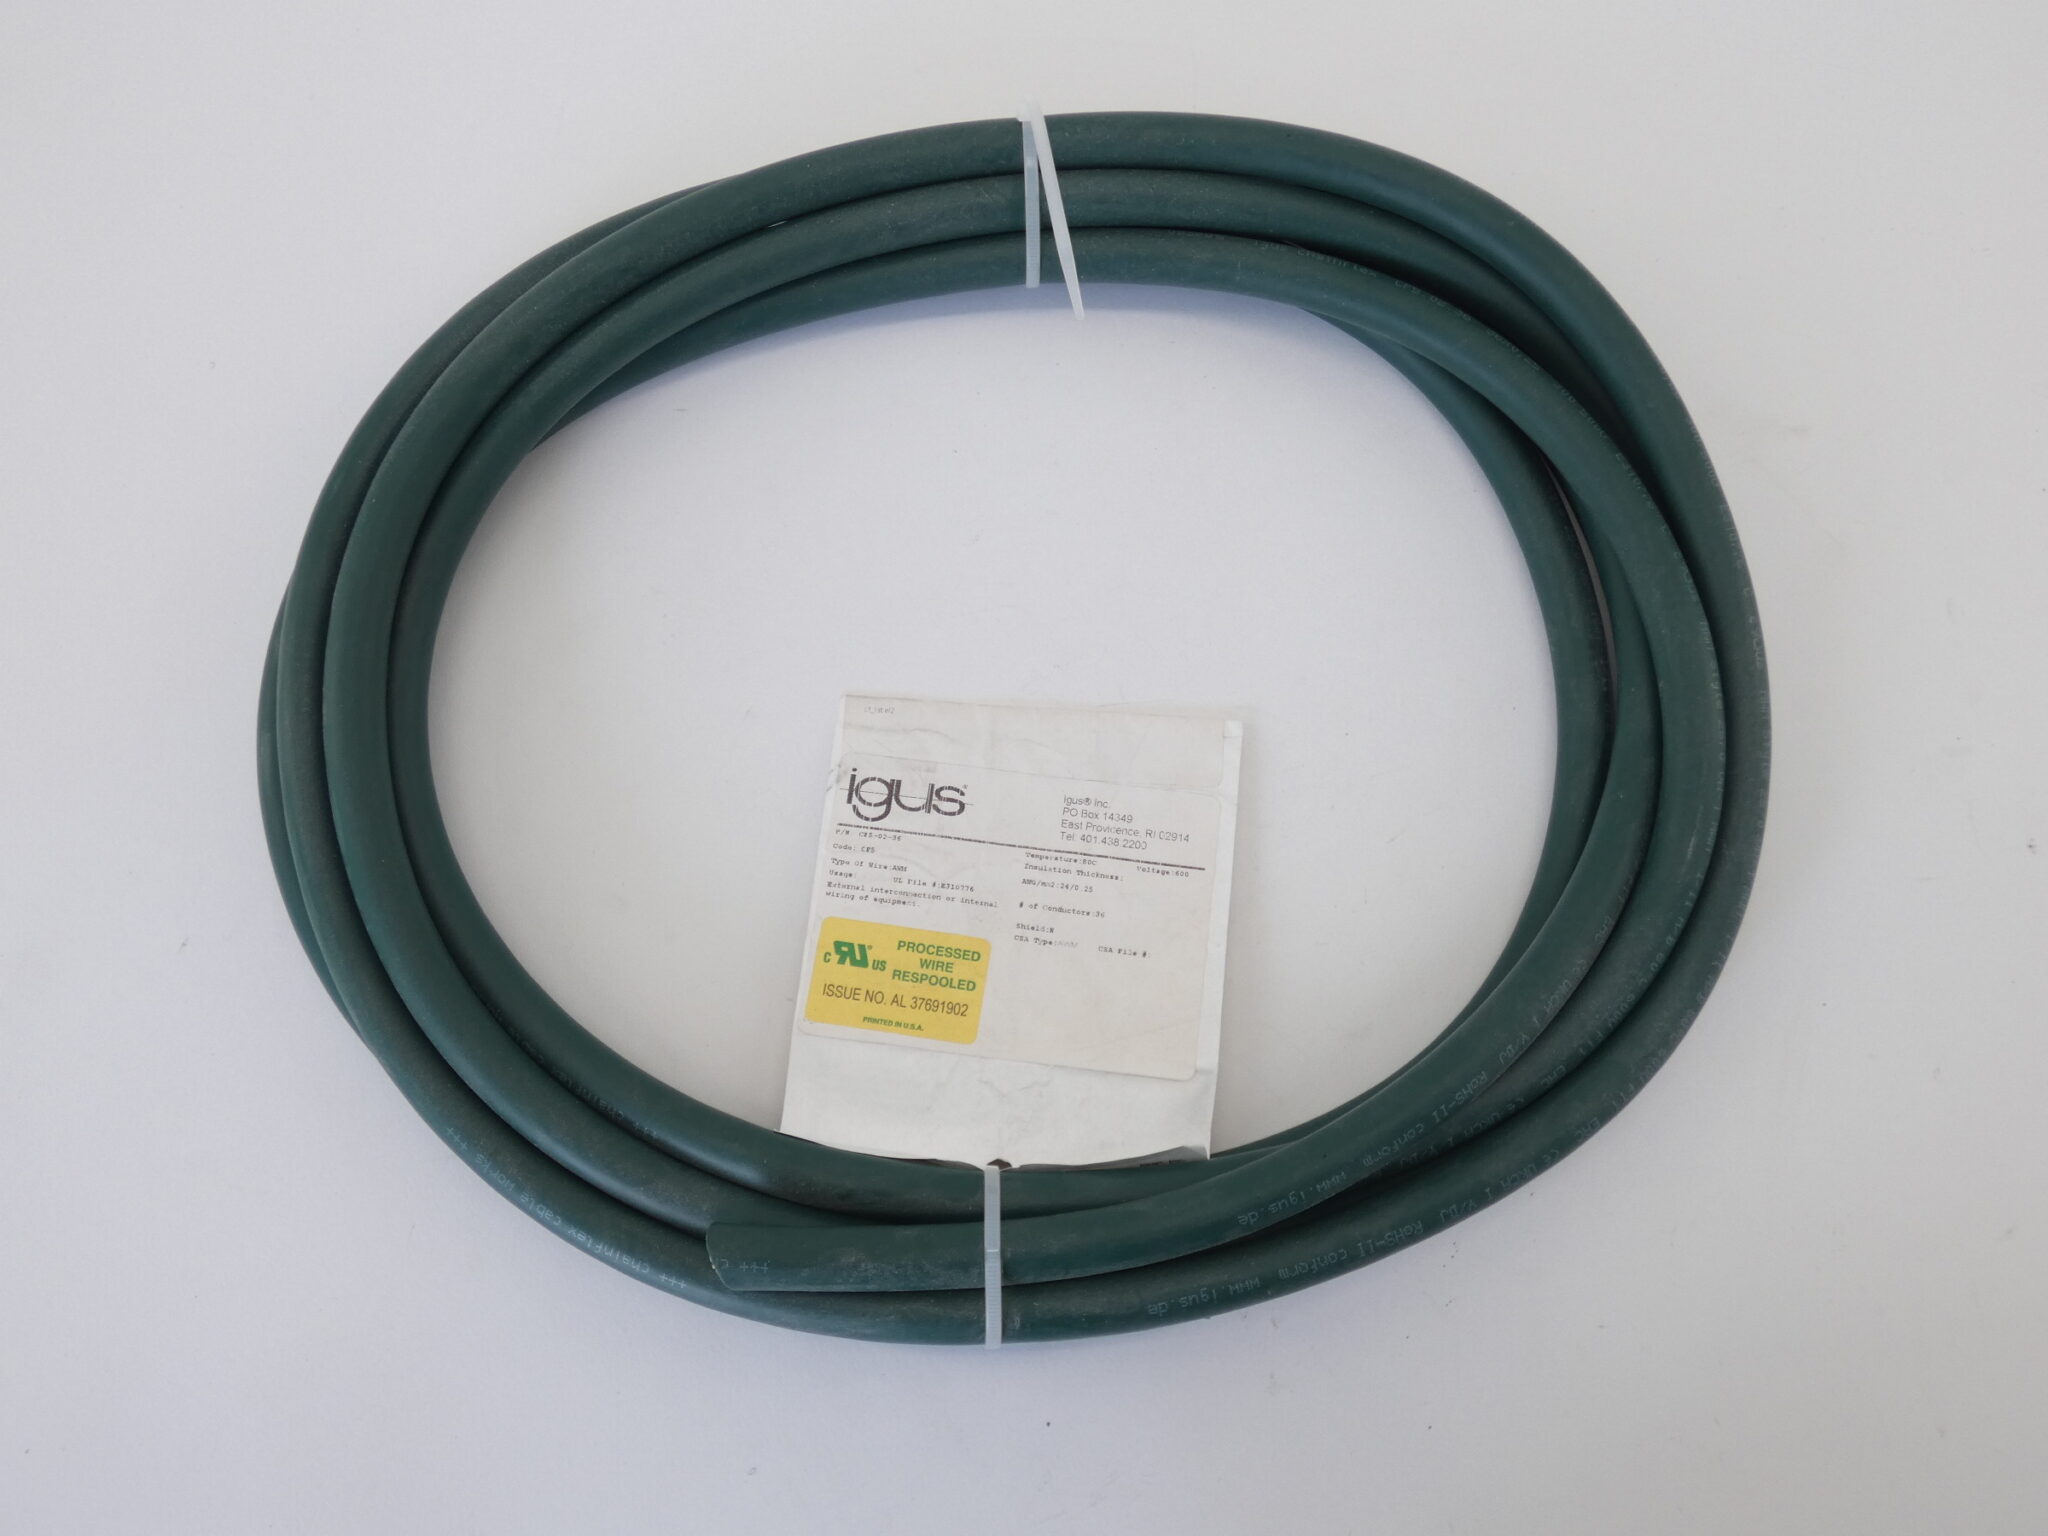 Igus CF5-02-36 Chainflex Cable Green 15 Ft - NEW Surplus!